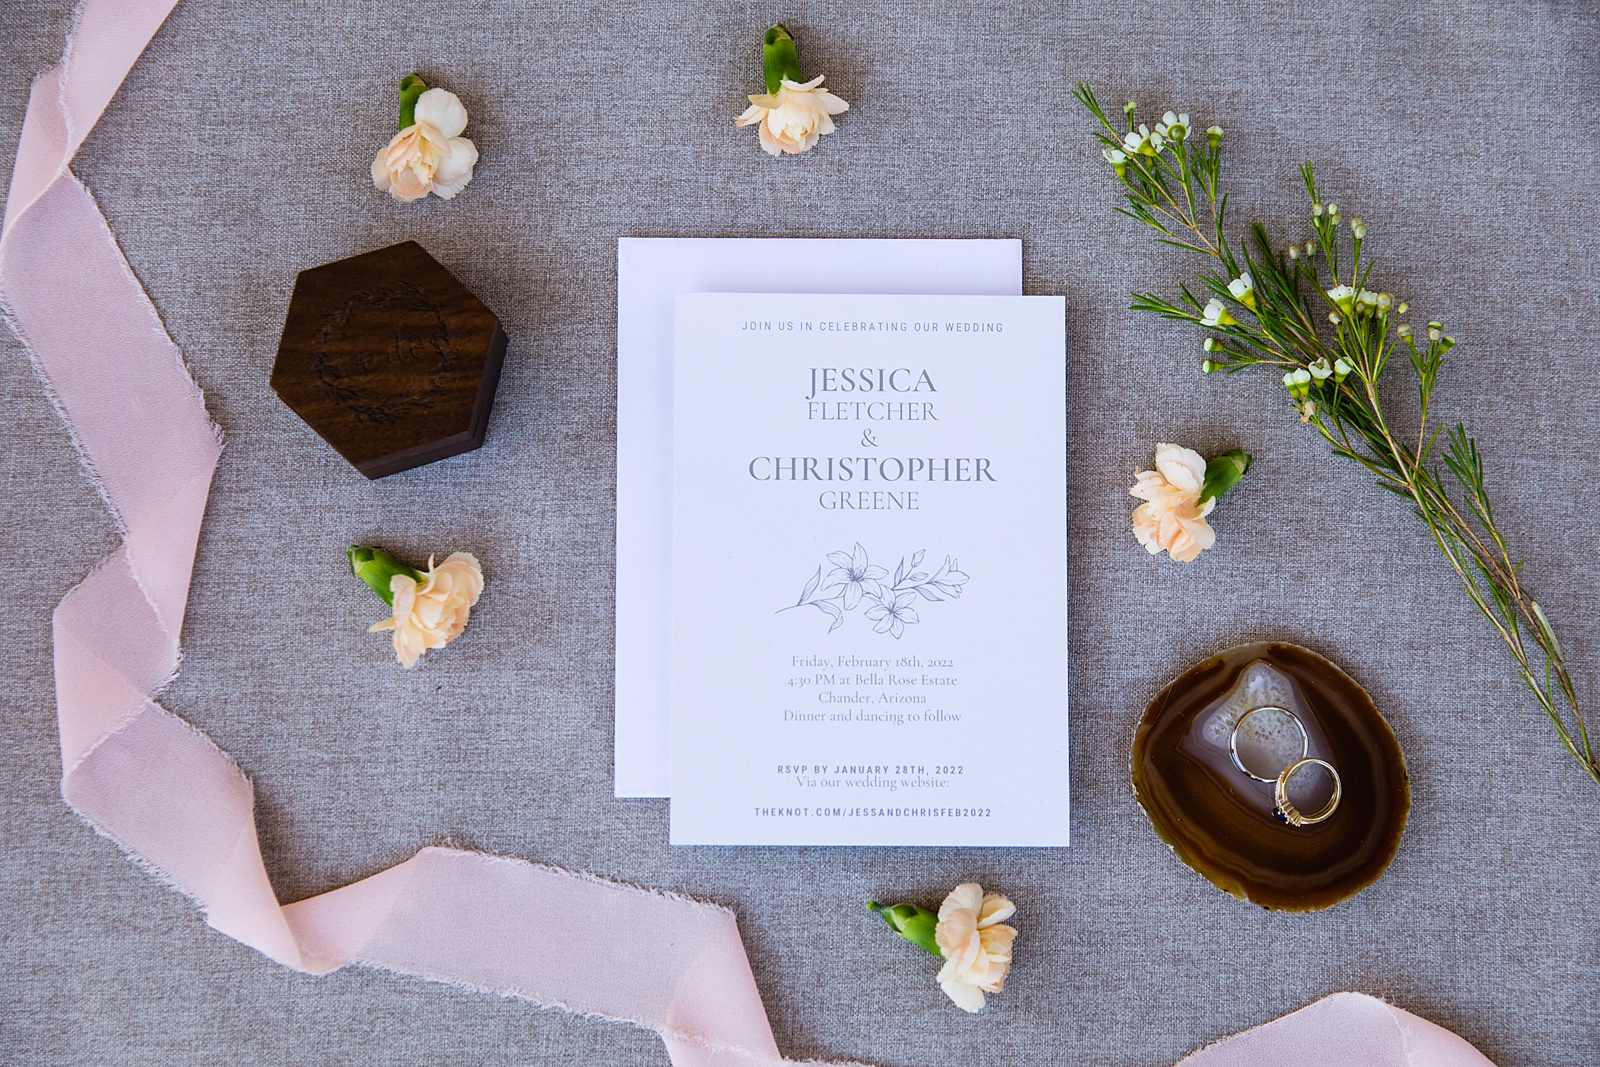 Romantic garden wedding invitations with rings and a ring box by Arizona wedding photographer PMA Photography.